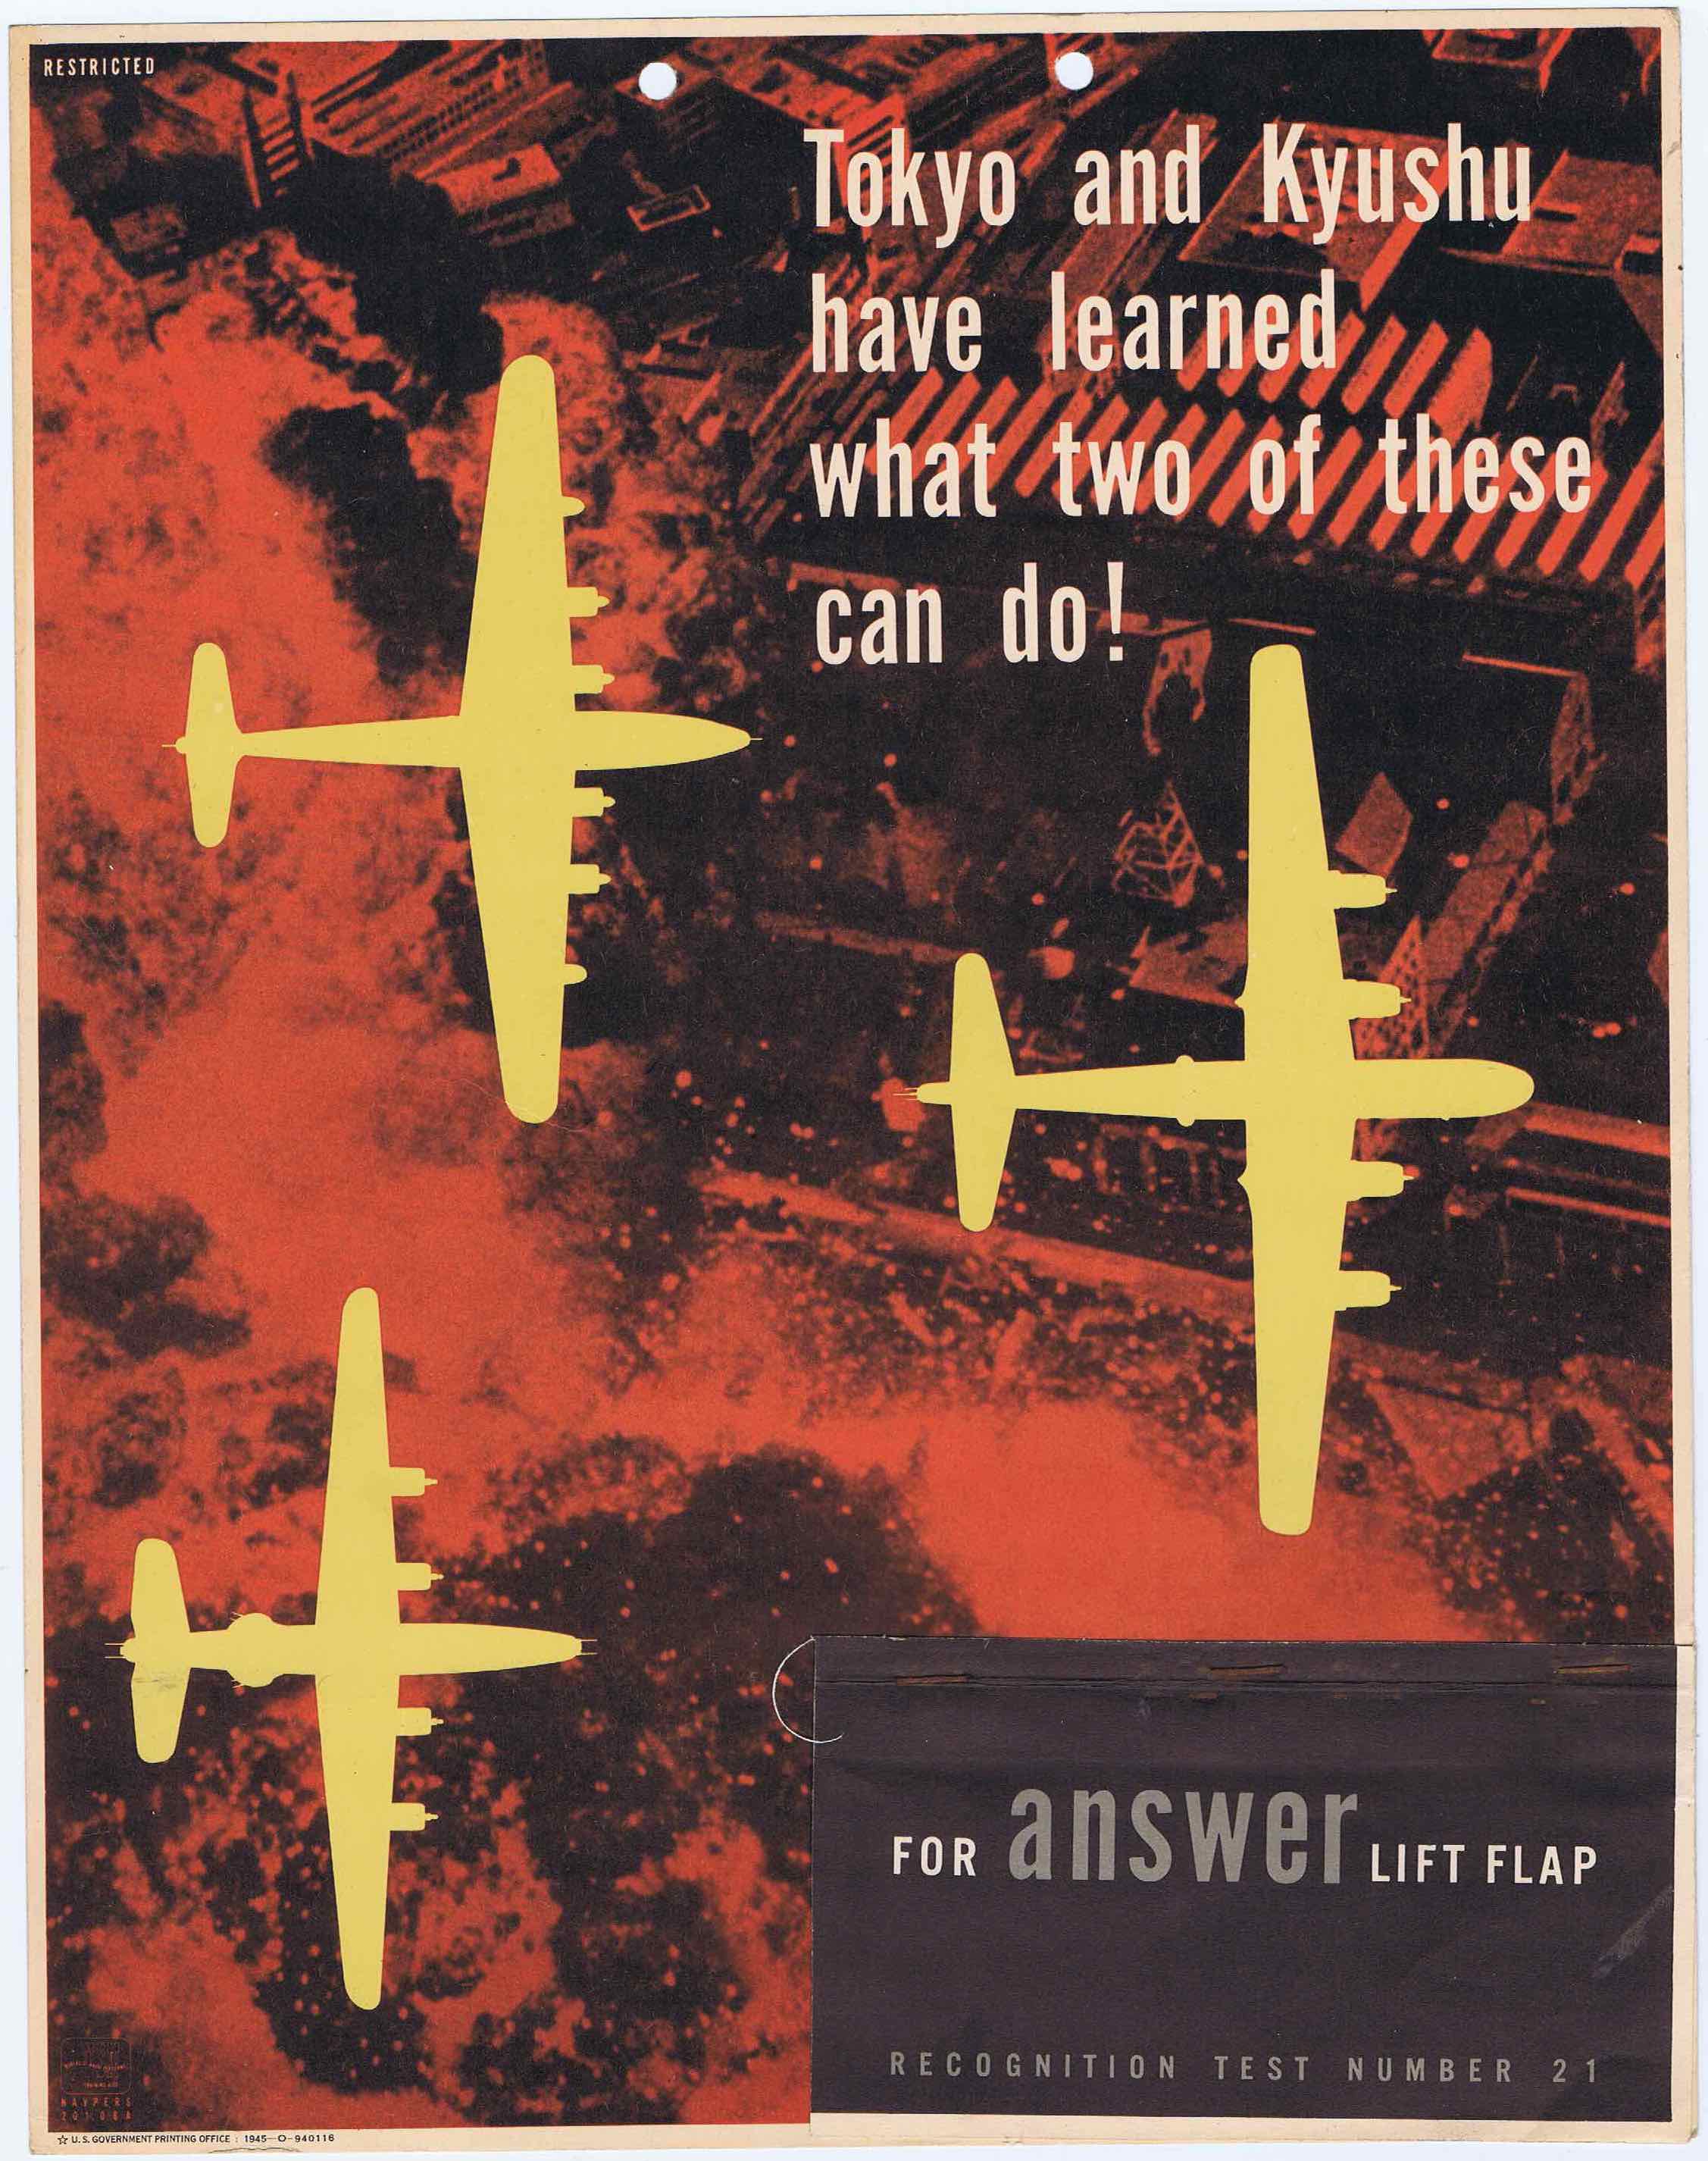 J320	TOKYO AND KYUSHU HAVE LEARNED WHAT TWO OF THESE CAN DO! - U.S. ARMY AIR FORCE RECOGNITION POSTER